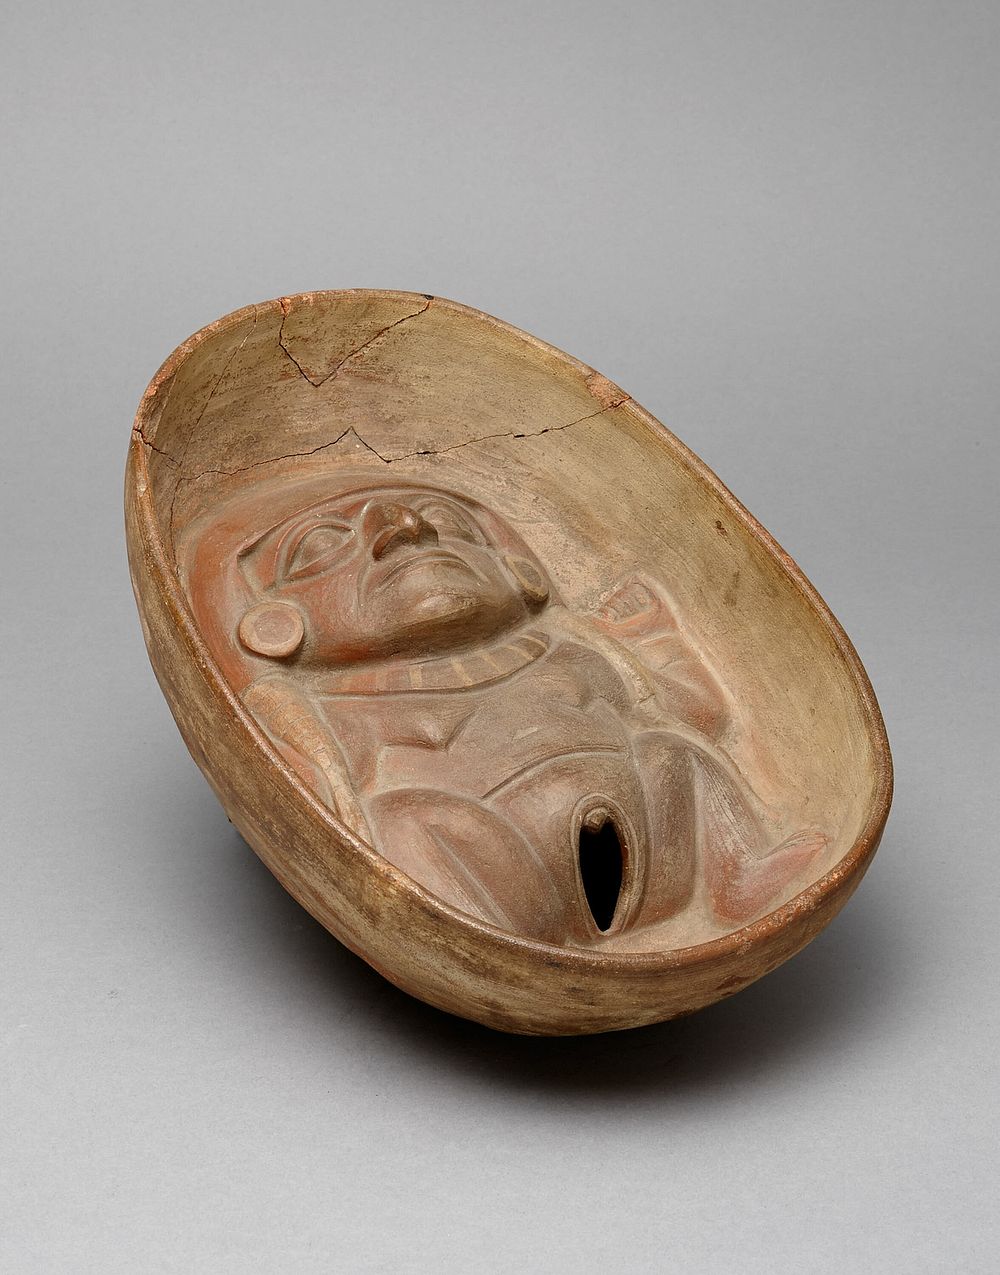 Bowl with Molded Nude Female Figure in the Interior by Moche